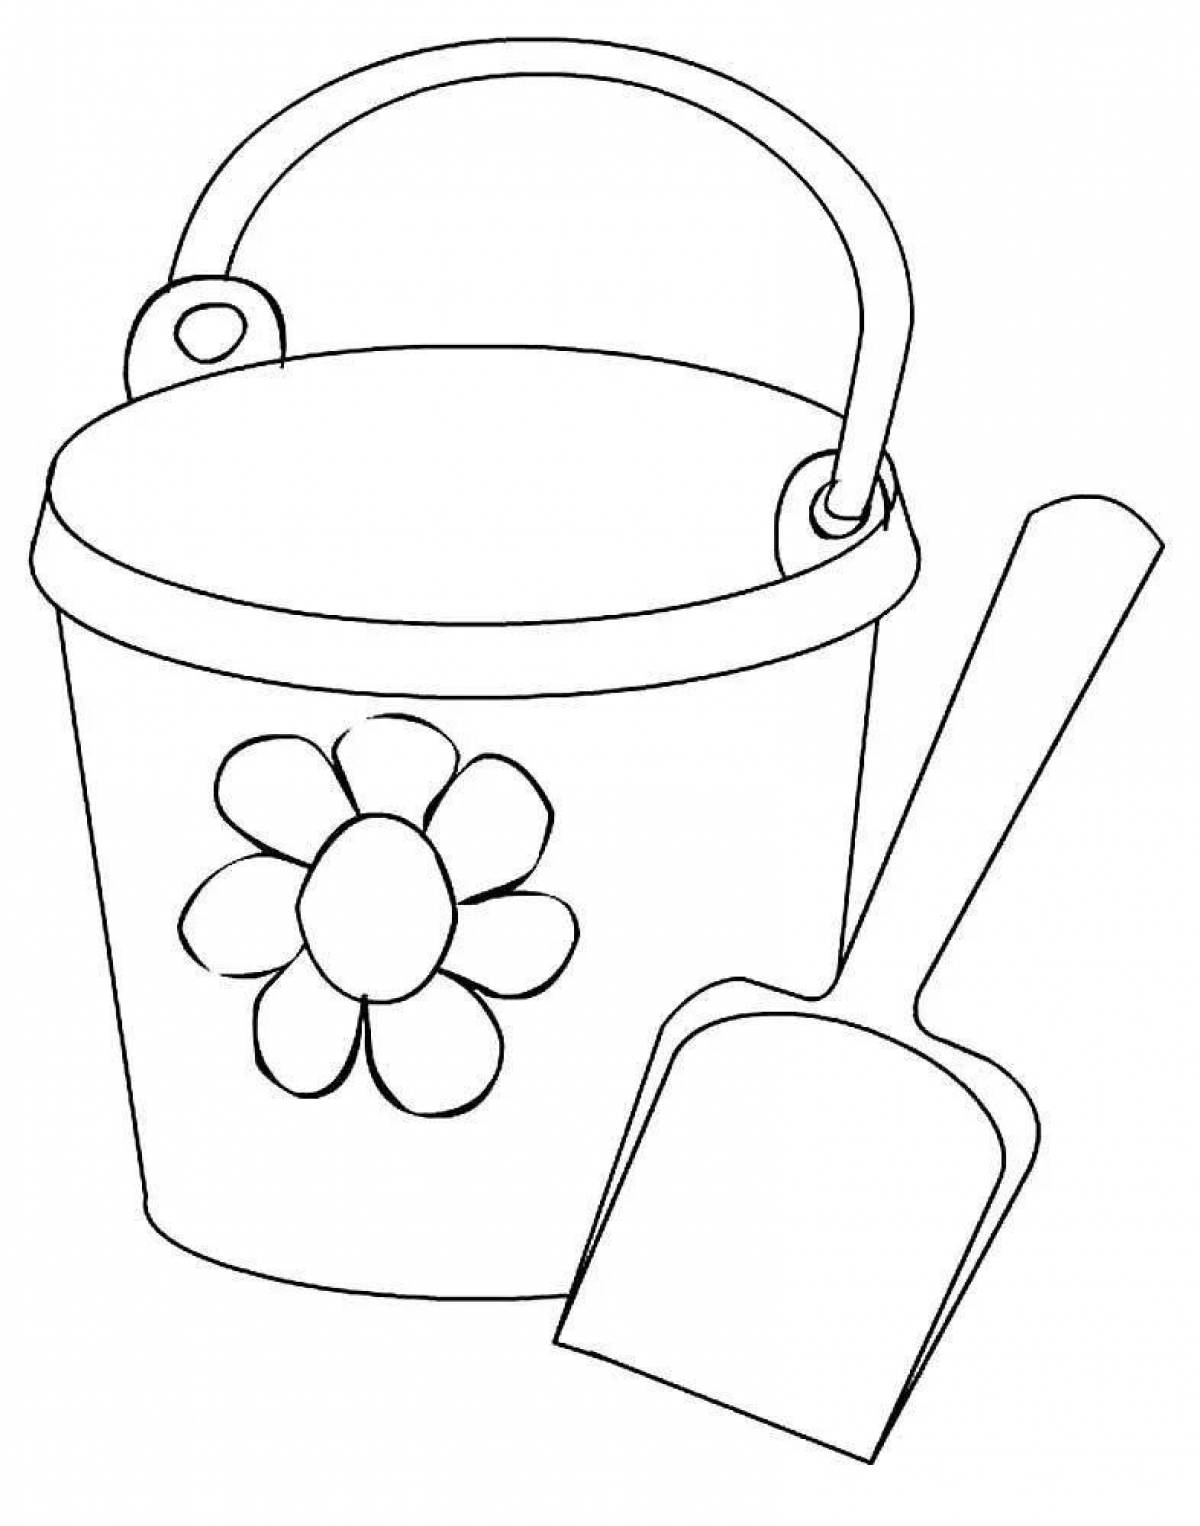 Adorable bucket coloring book for kids